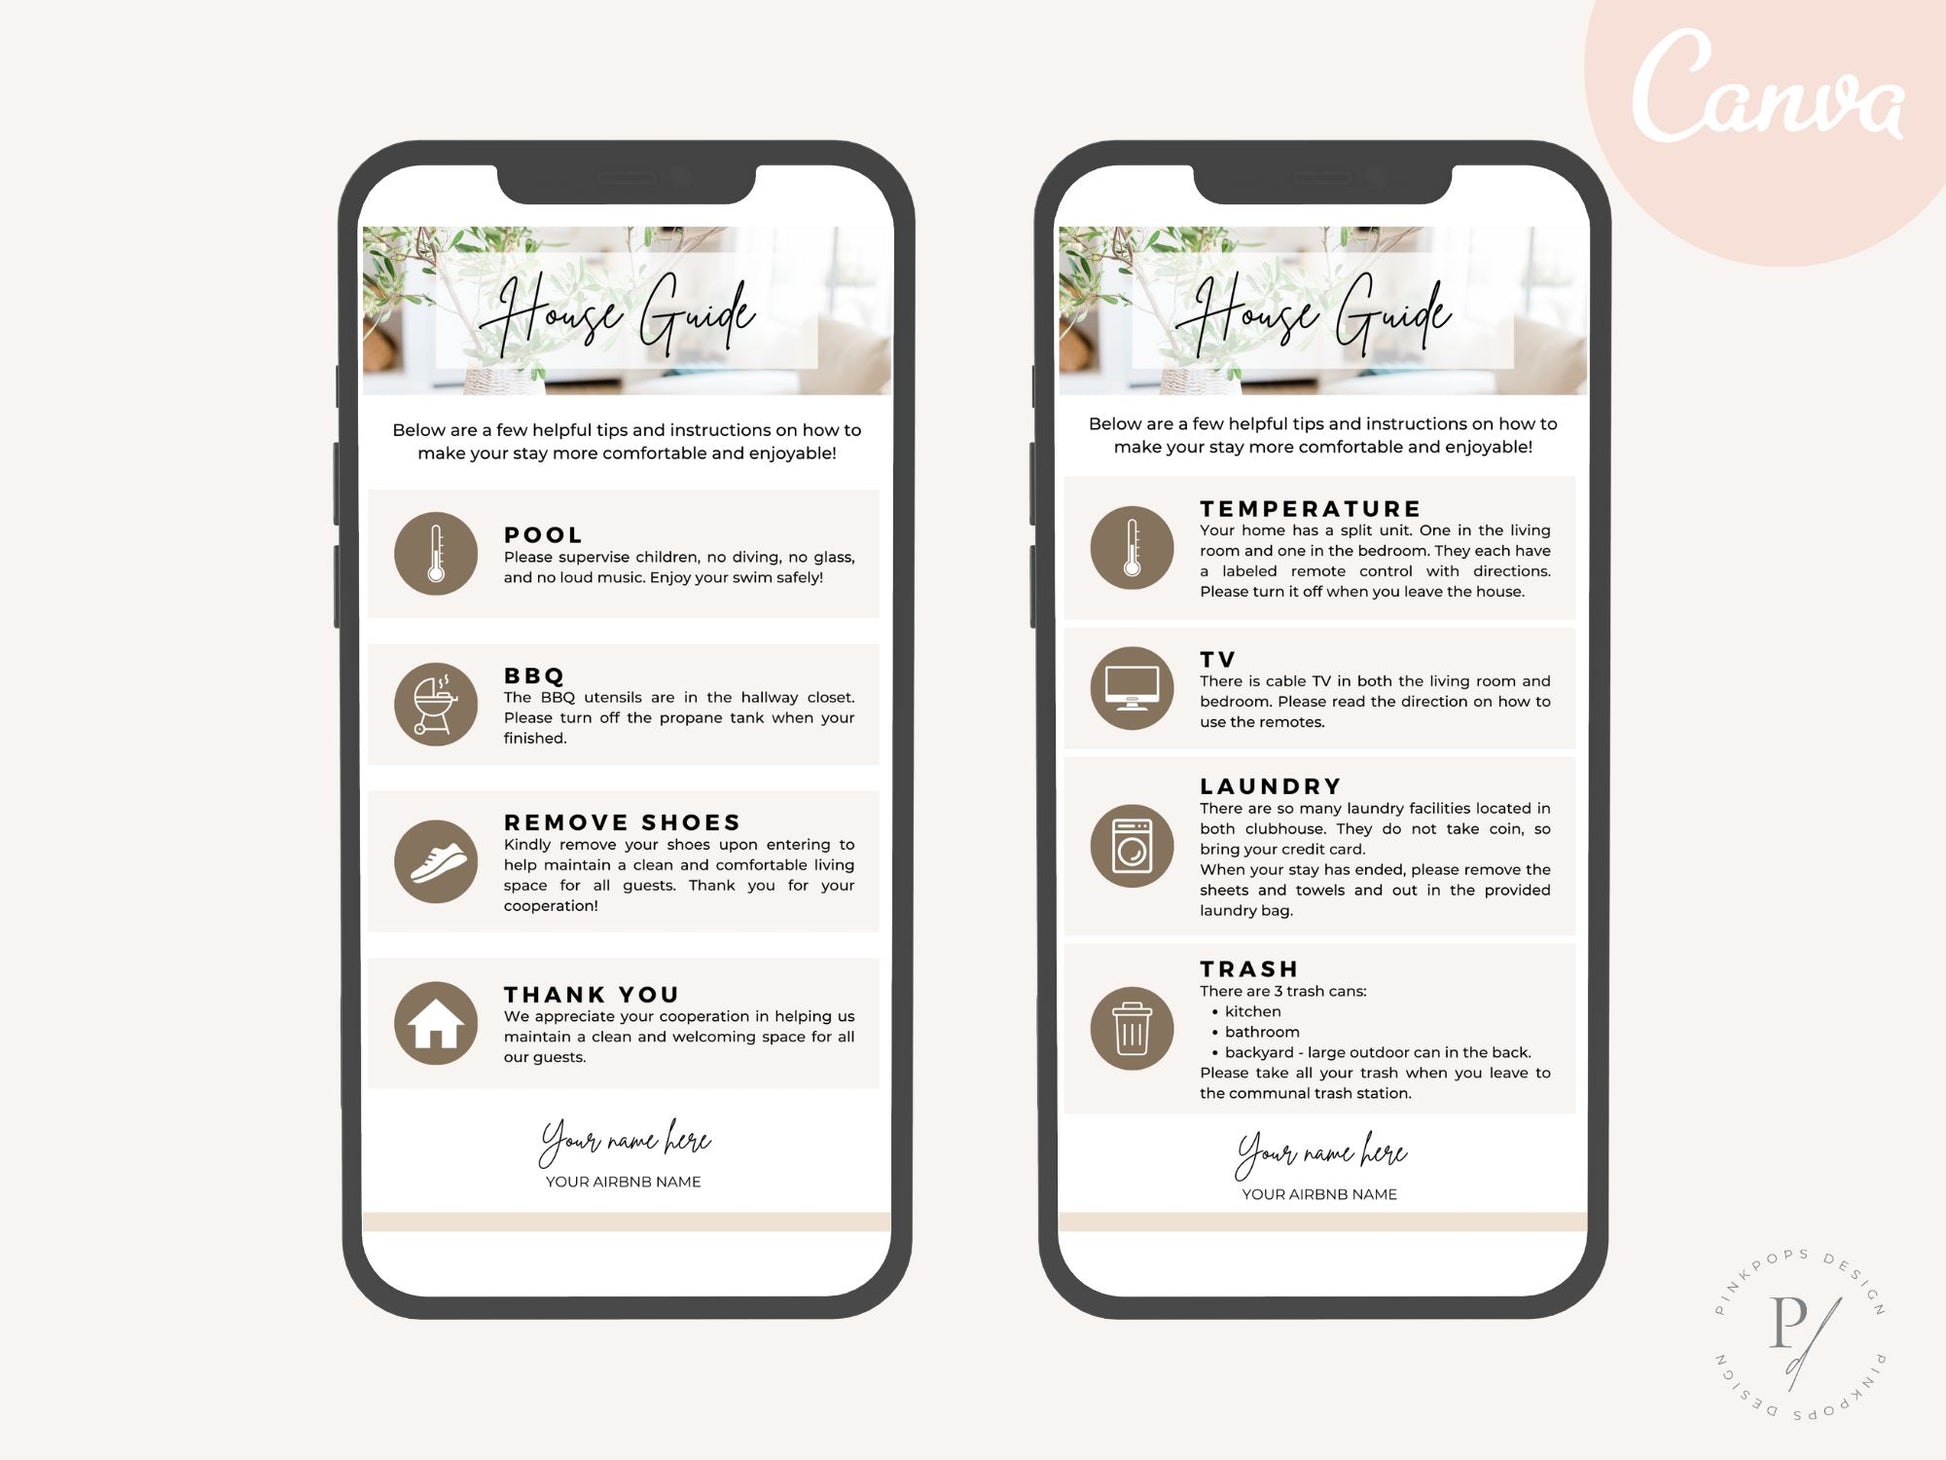 Textable House Guides - Editable and digital Airbnb template for clear guest communication and property guidance